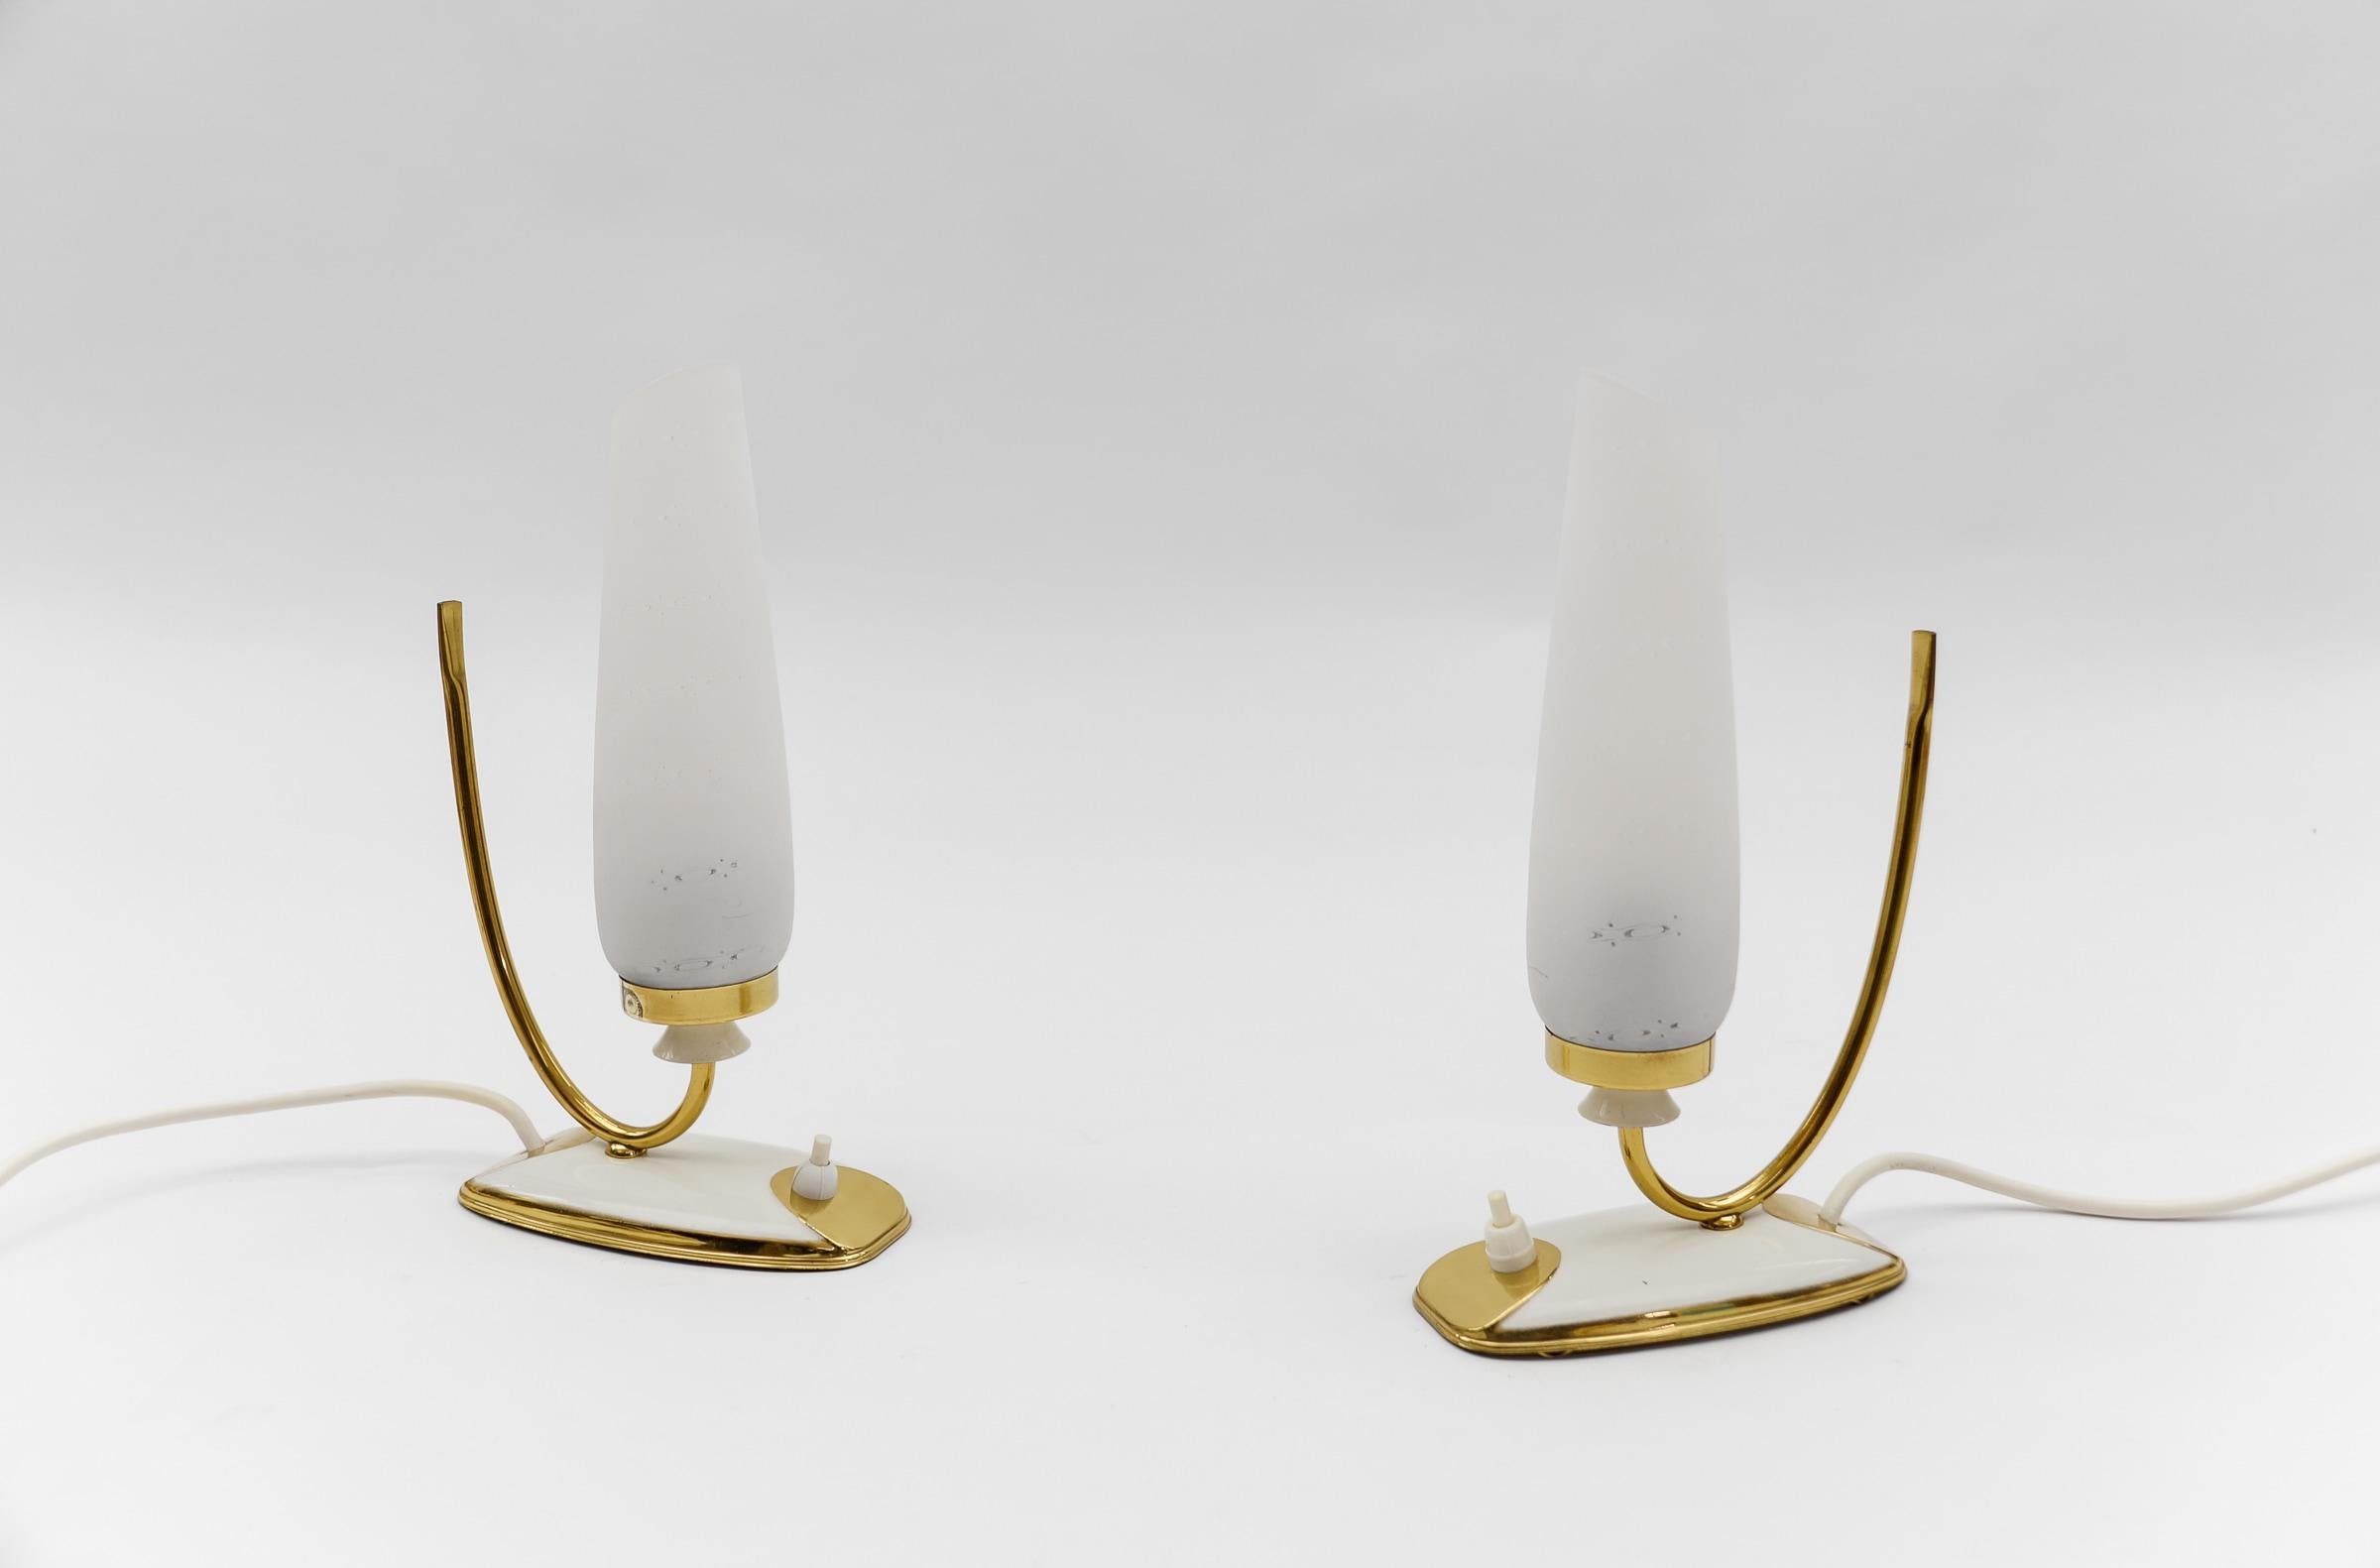 Lovely Mid-Century Modern Brass and Glass Table Lamps, 1950s  

Each lamp needs 1 x E14 Edison screw fit bulb, is wired, and in working condition. It runs both on 110 / 230 volt.

Very elegant and cute at the same time.

Light bulbs are not